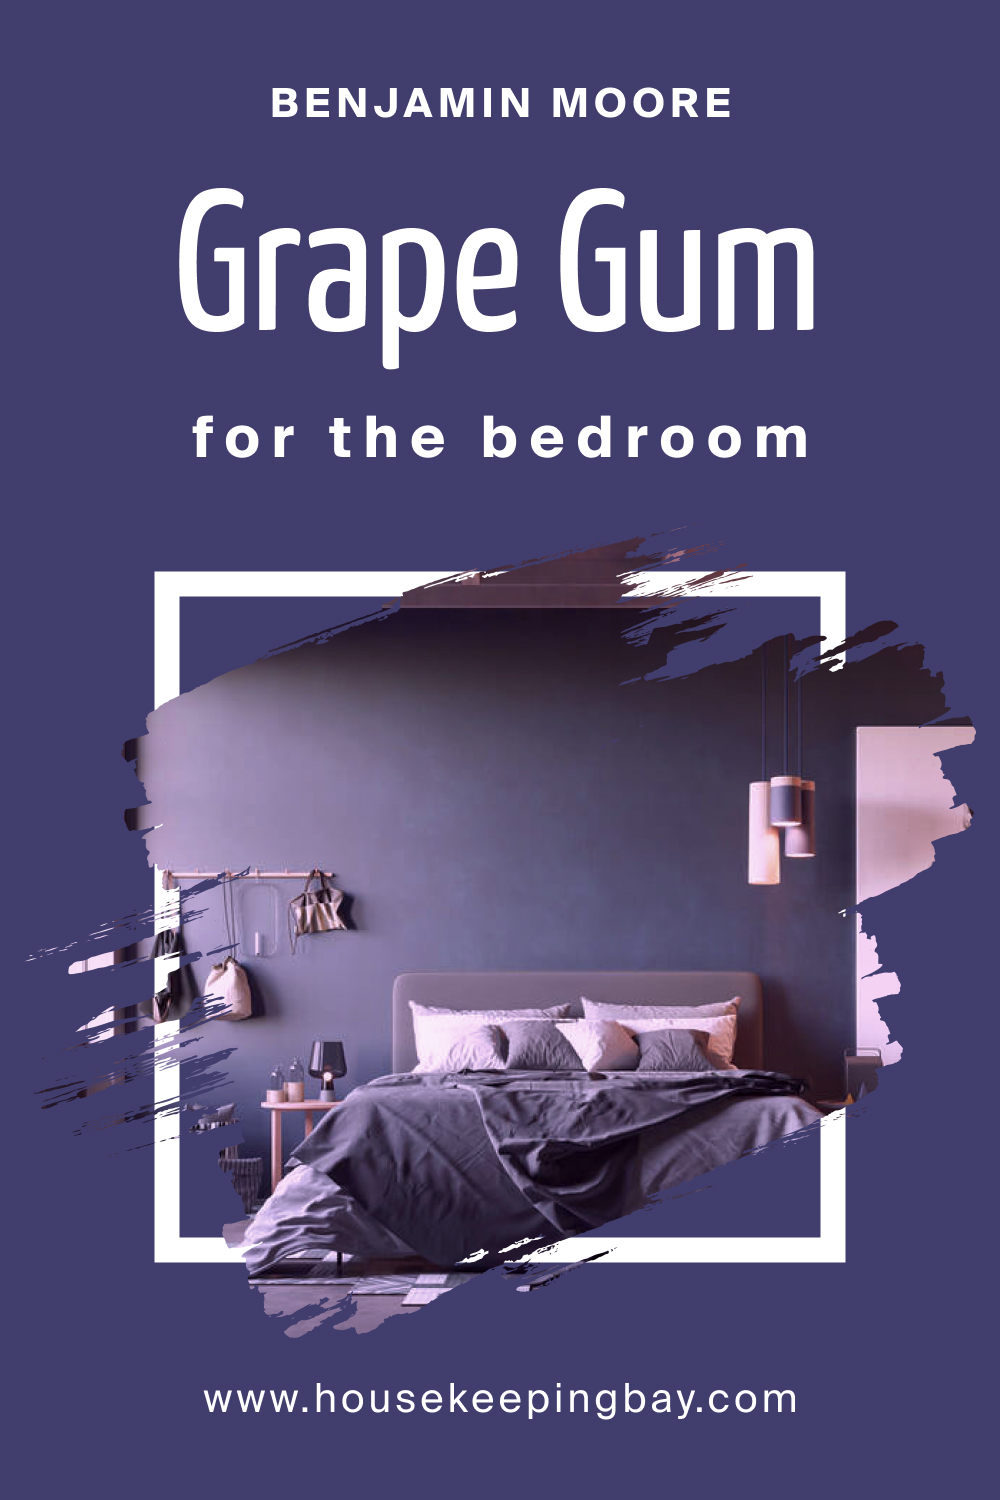 How to Use BM Grape Gum 2068-20 in the Bedroom?